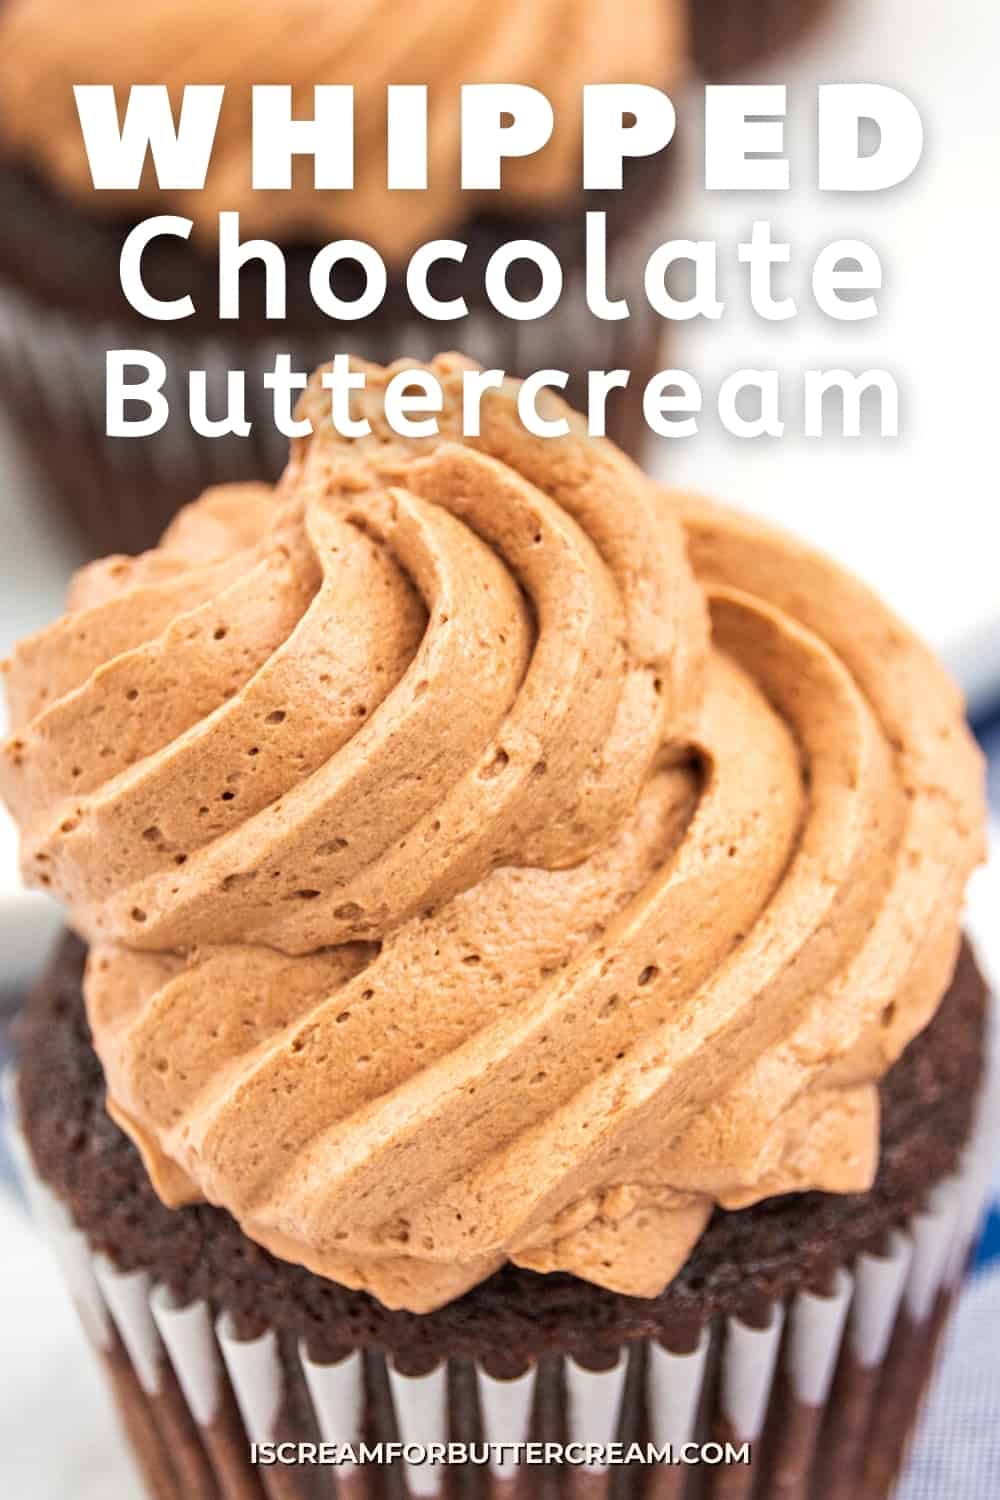 whipped chocolate buttercream graphic with text